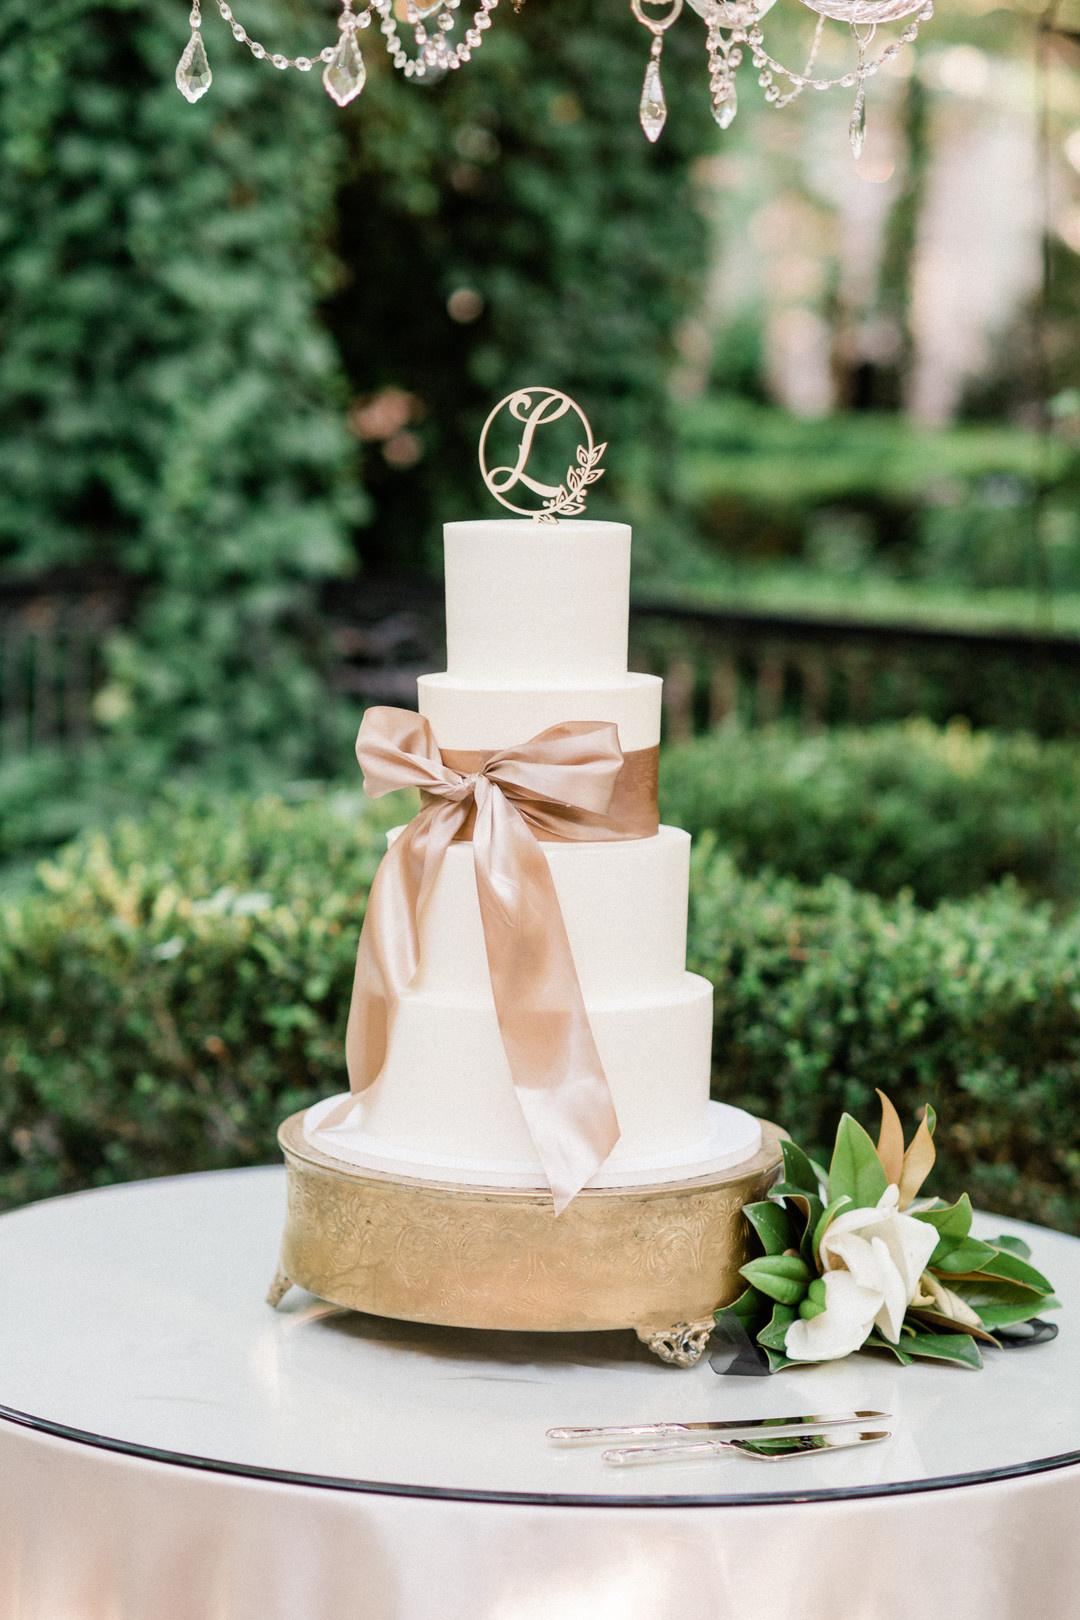 34 Creative Wedding Cakes That Are So Pretty : Textured Square Wedding Cake